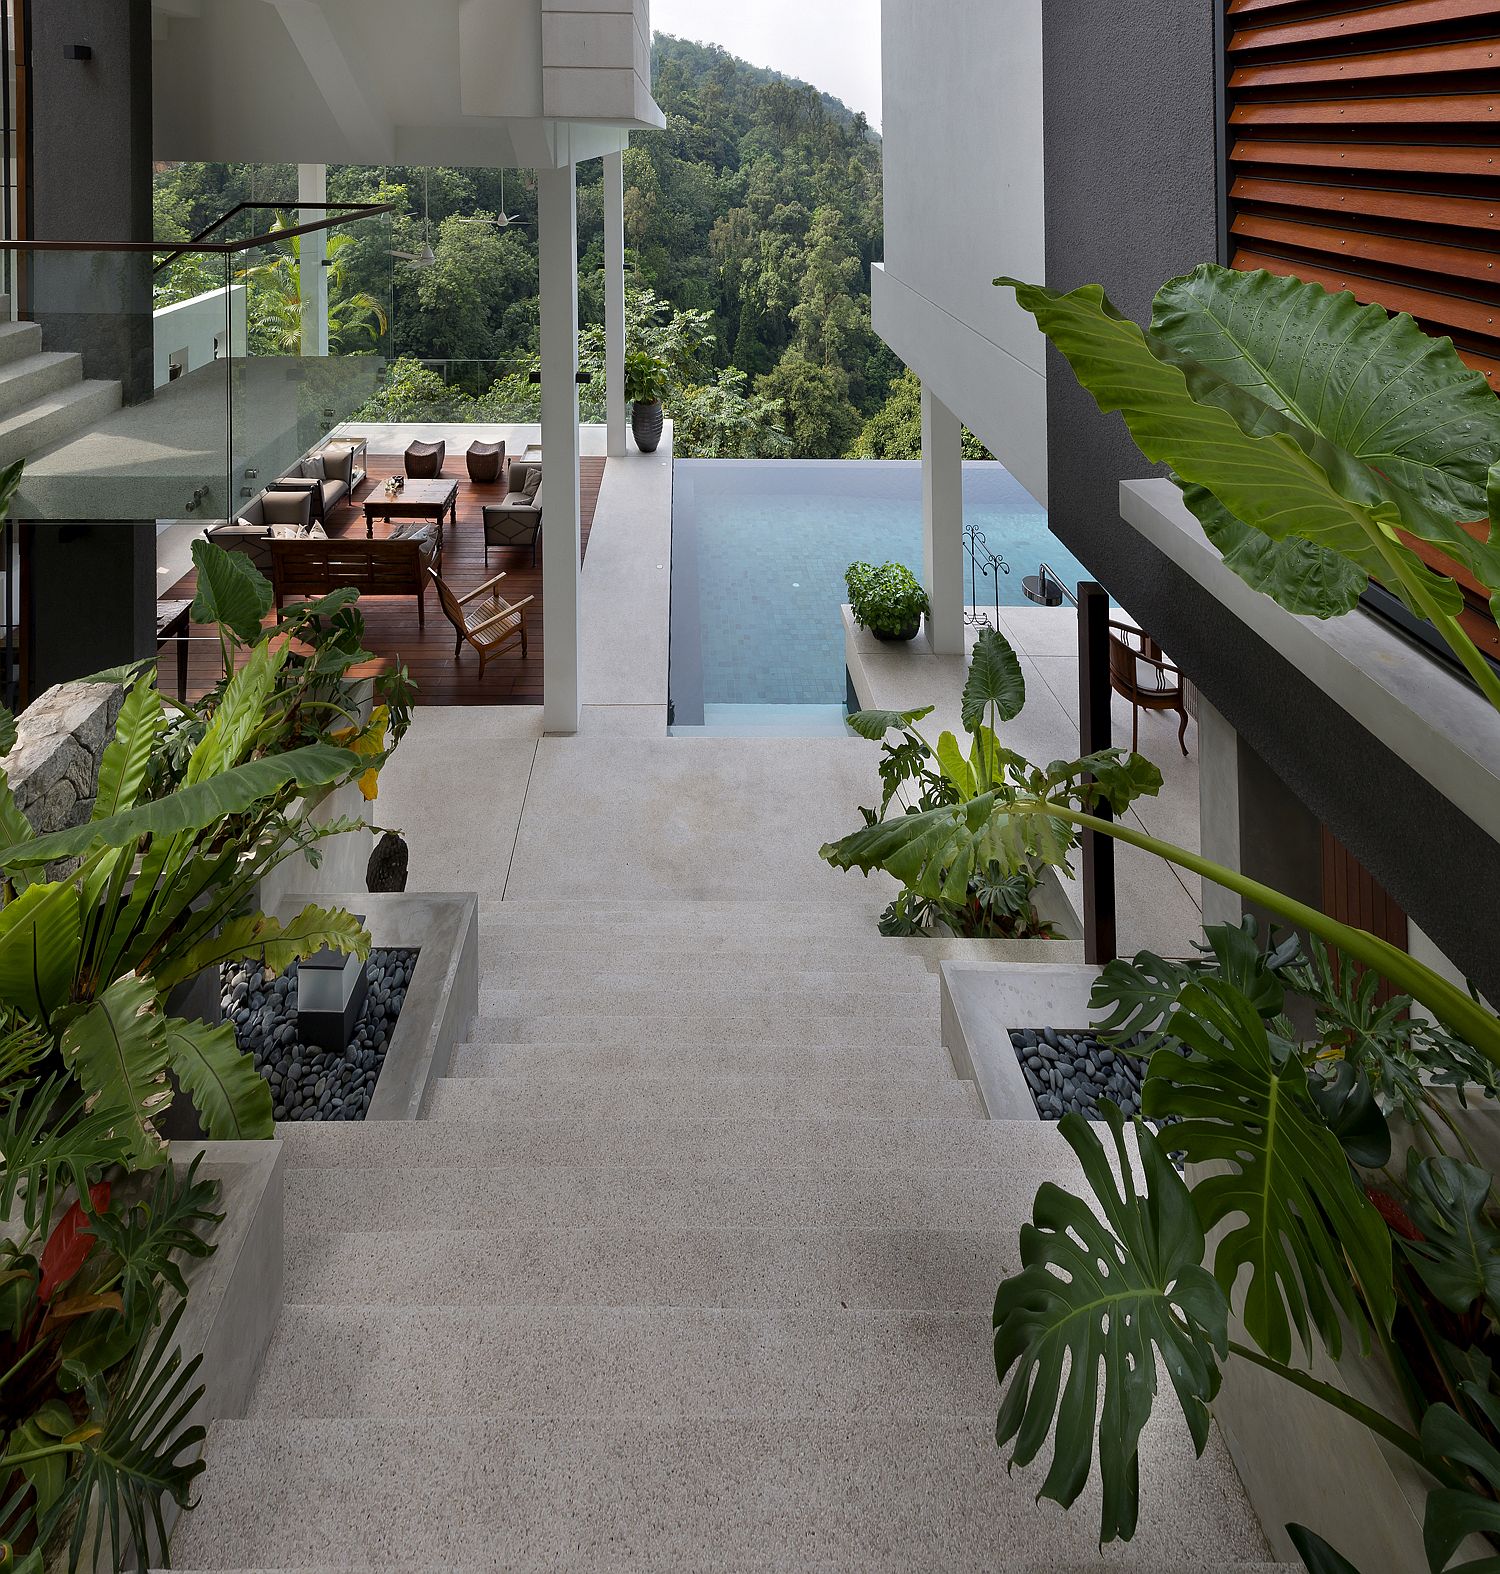 Stairway-leading-to-the-pool-area